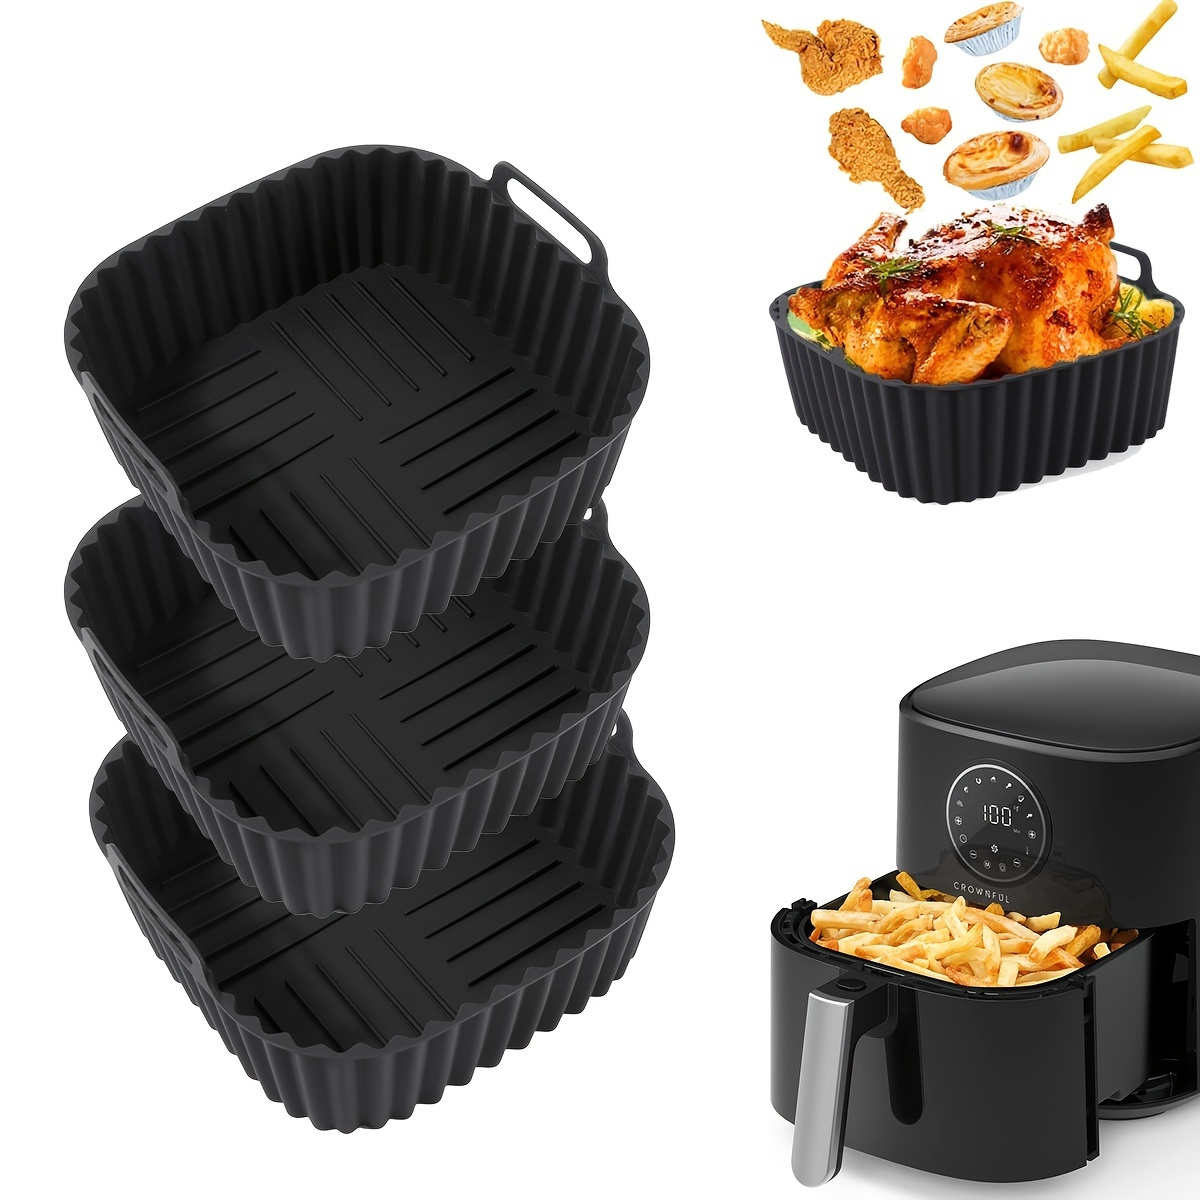 MMH Silicone Liners Rectangular 2 Pcs for 10 Qt Air Fryer Dual Baskets, 2  Basket Airfryer Rectangle Silicone Pot Reusable Baking Tray Fits Ninja  Foodi